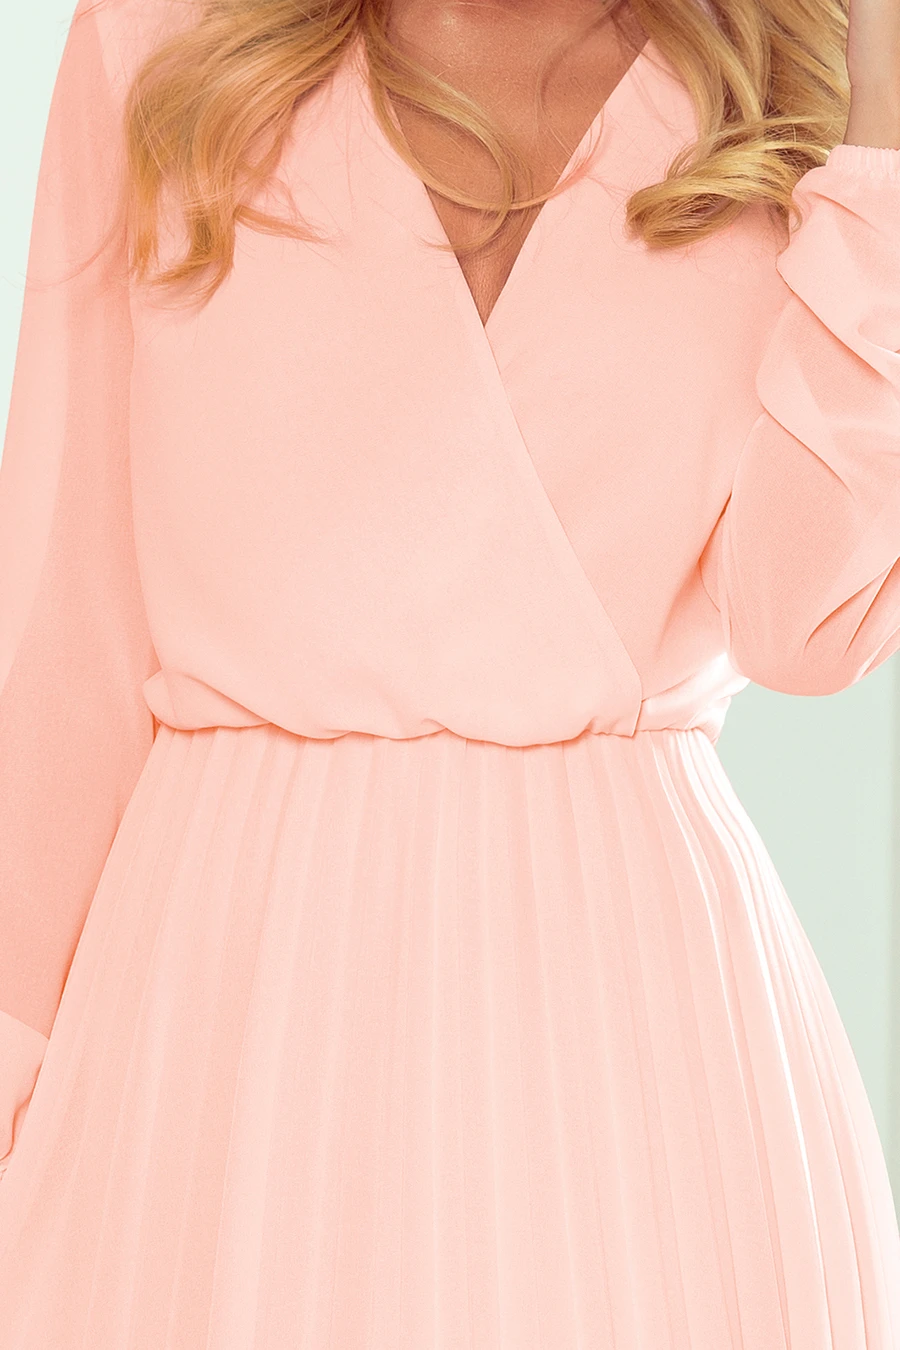 313-2 ISABELLE Pleated dress with neckline and long sleeve - peach color